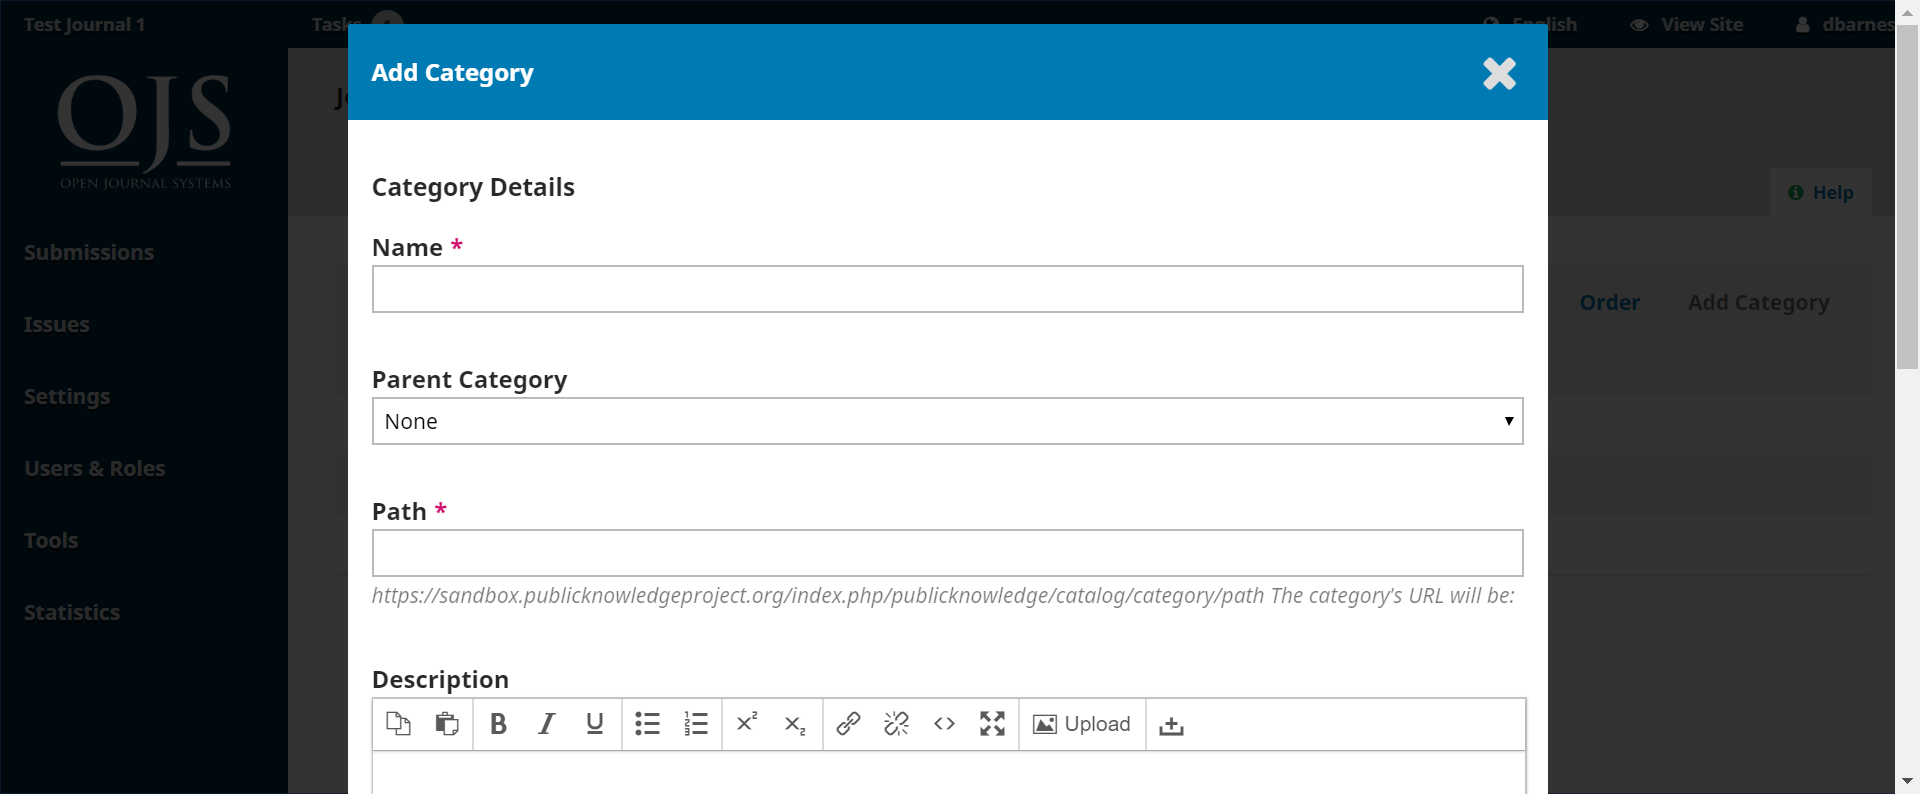 A new window for entering category information in text fields and selecting category options.